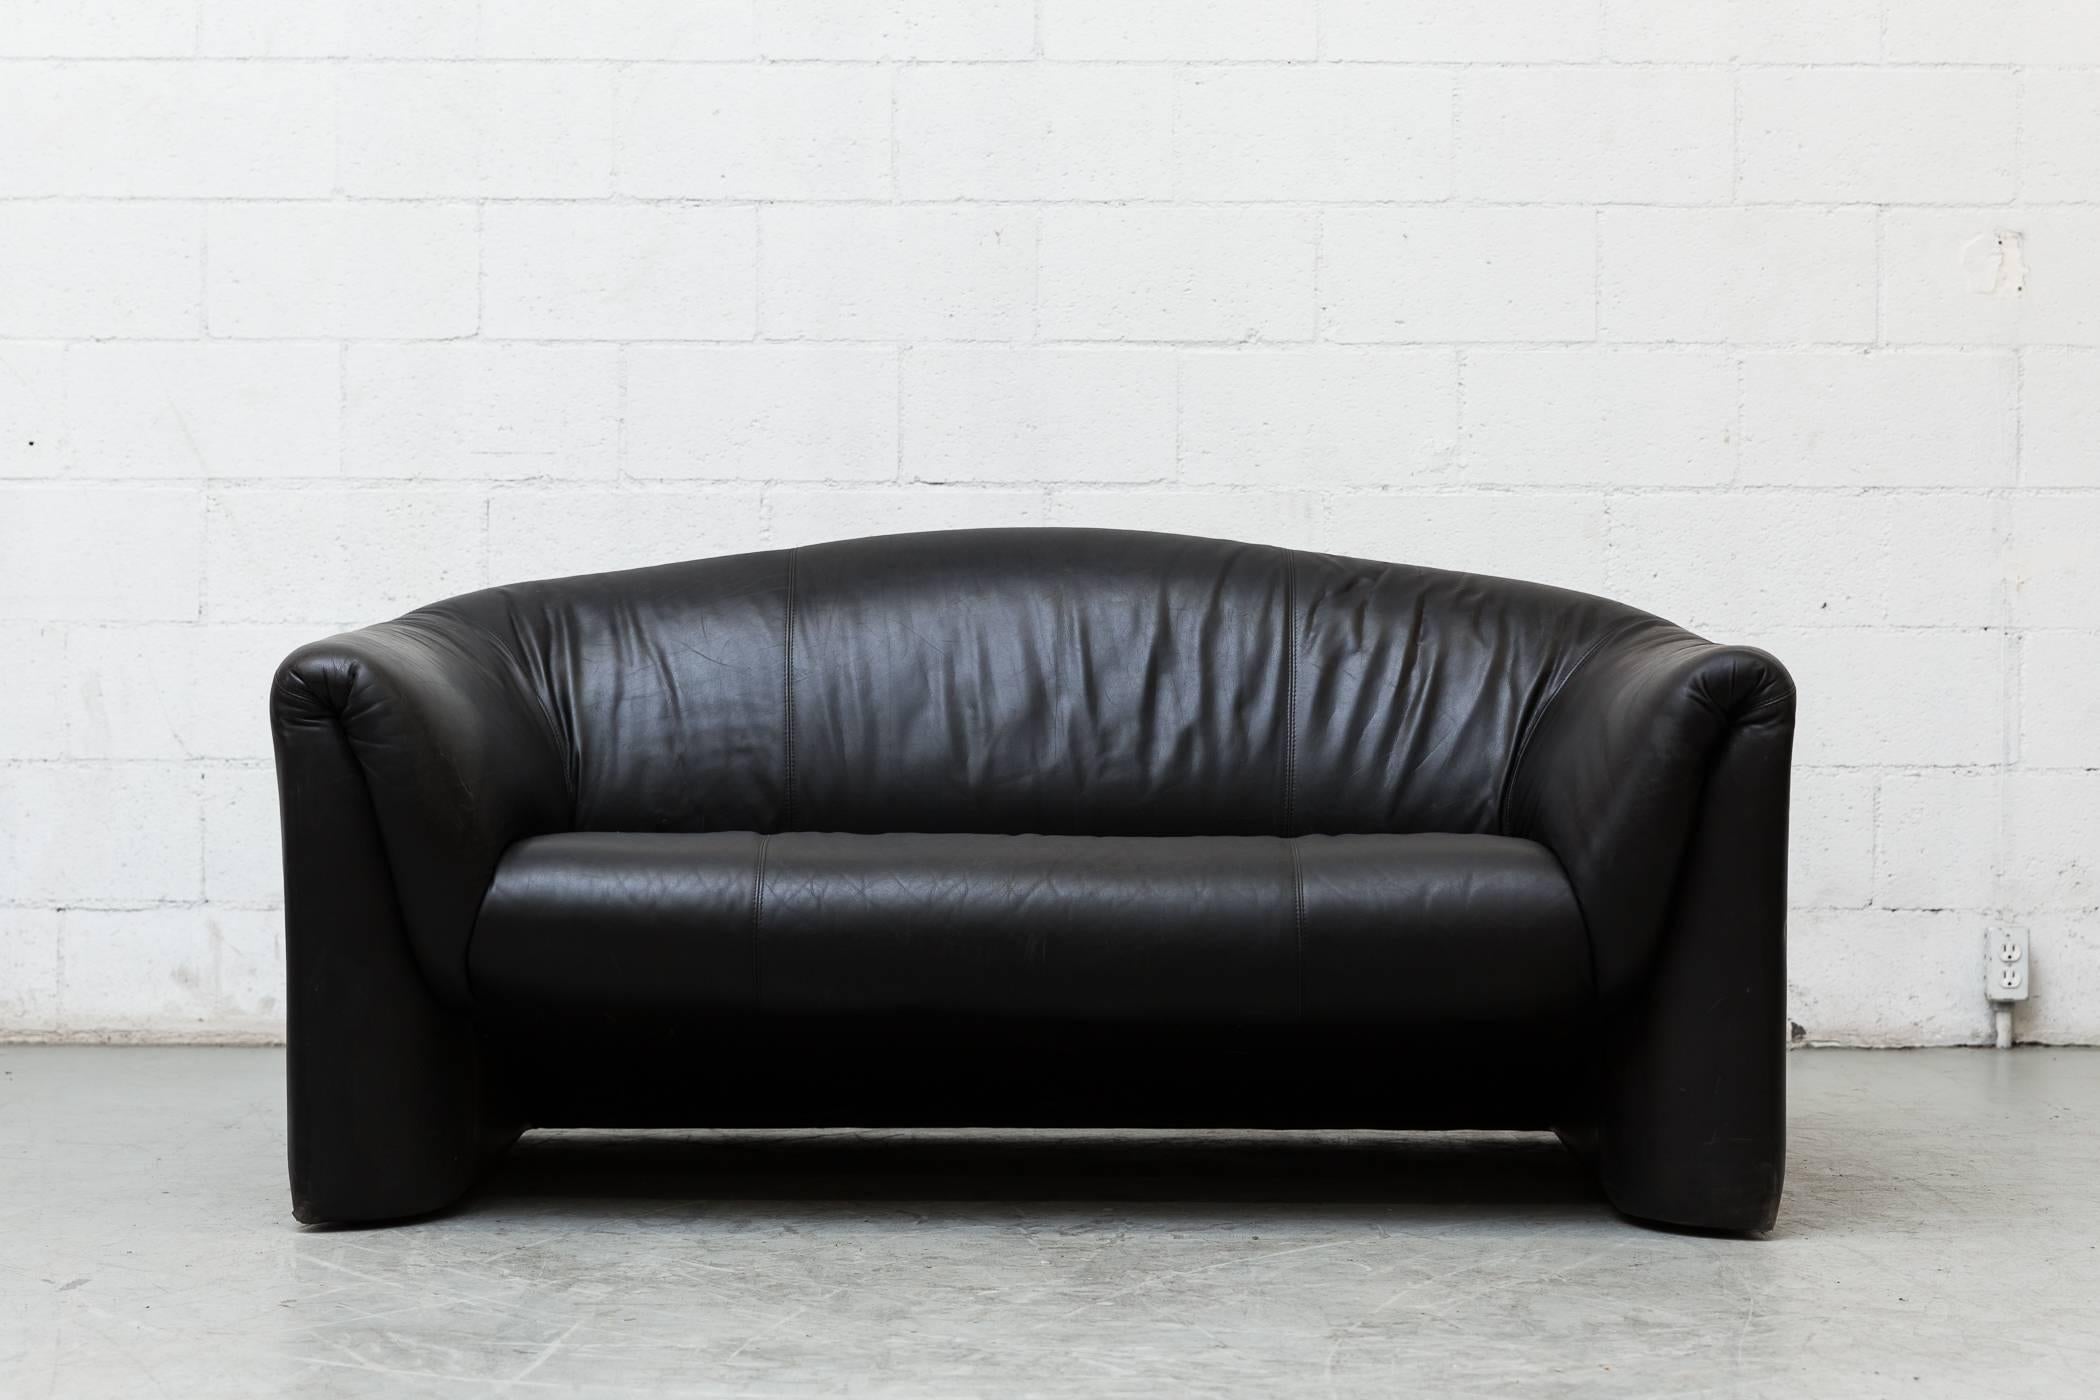 Handsome black leather love seat with top curved back. Vico Magistretti inspired form in good original condition.